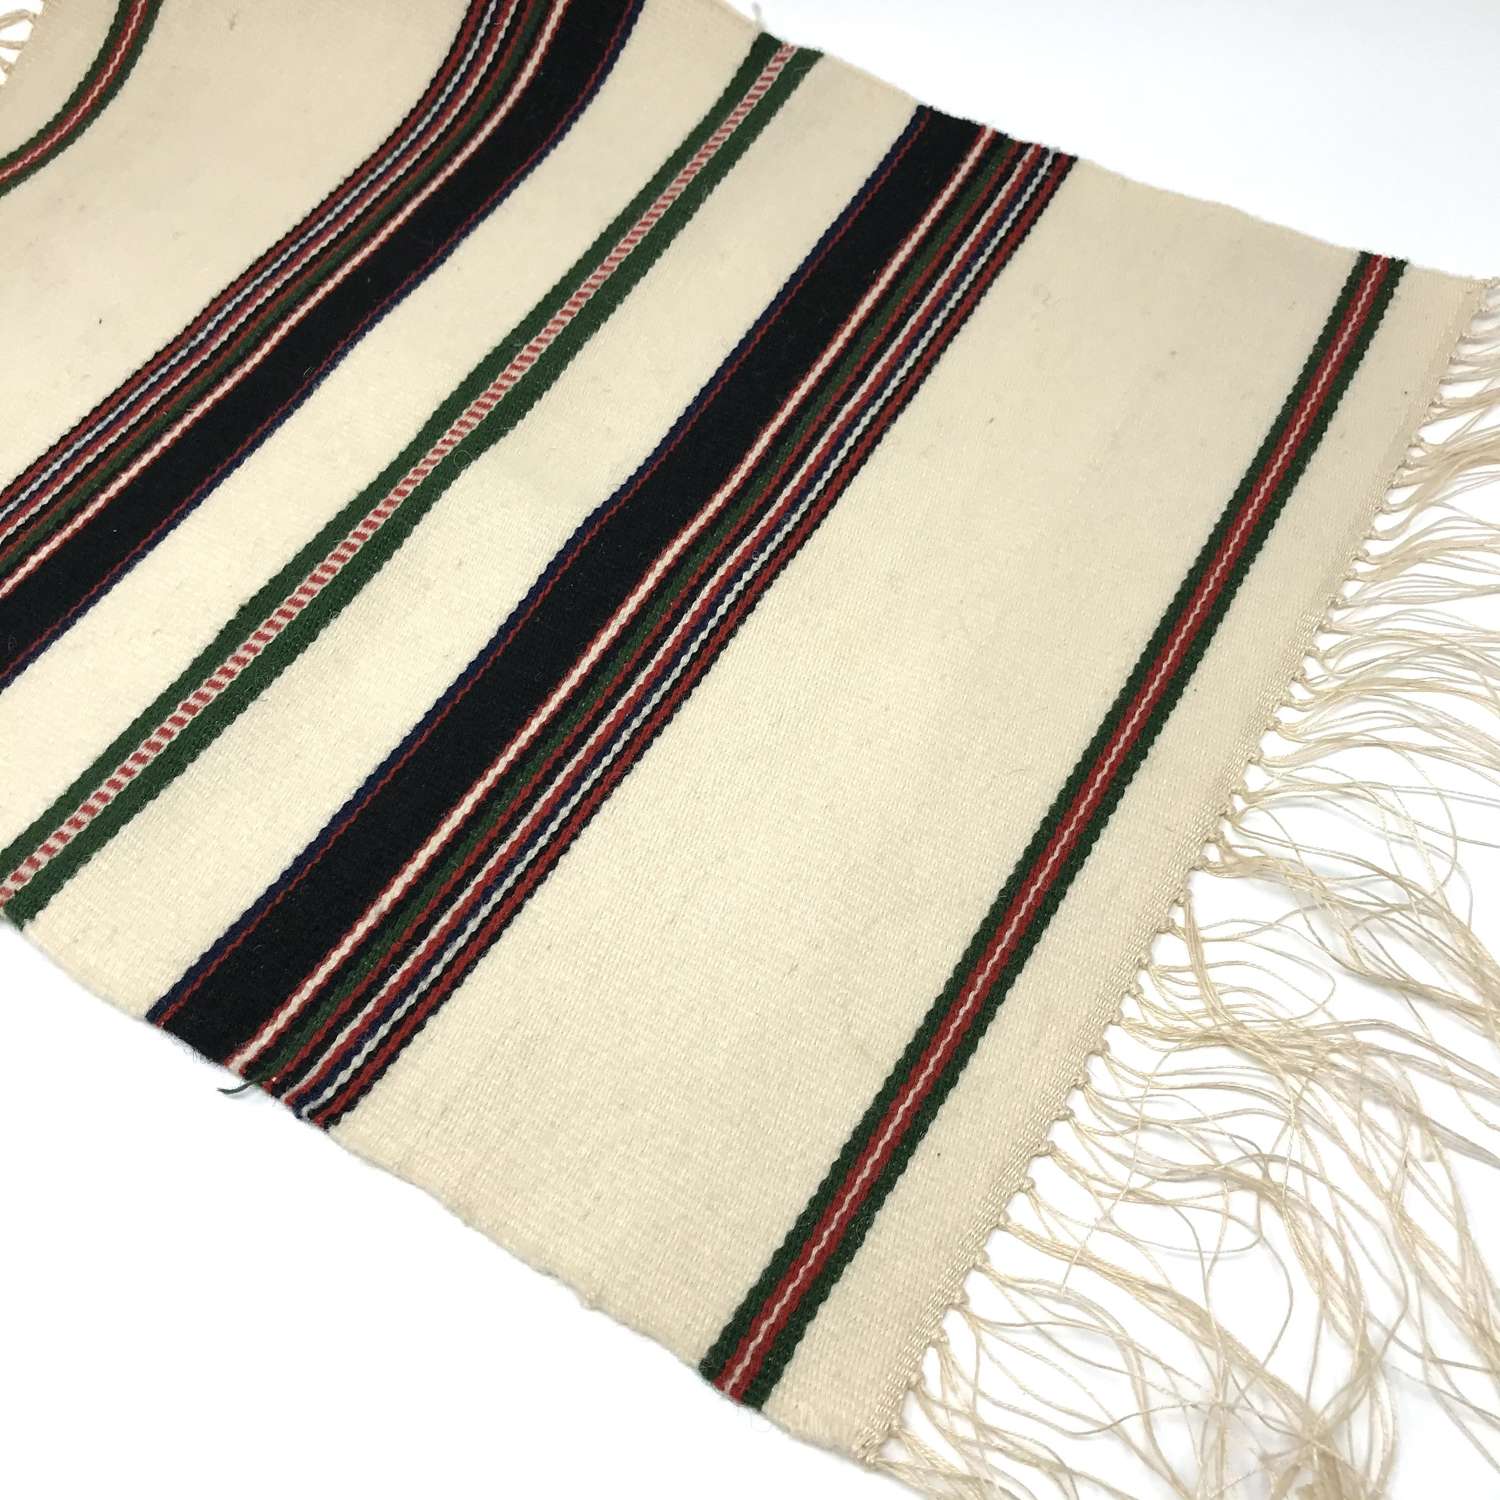 Handwoven Swedish woven wool table runner with long fringes